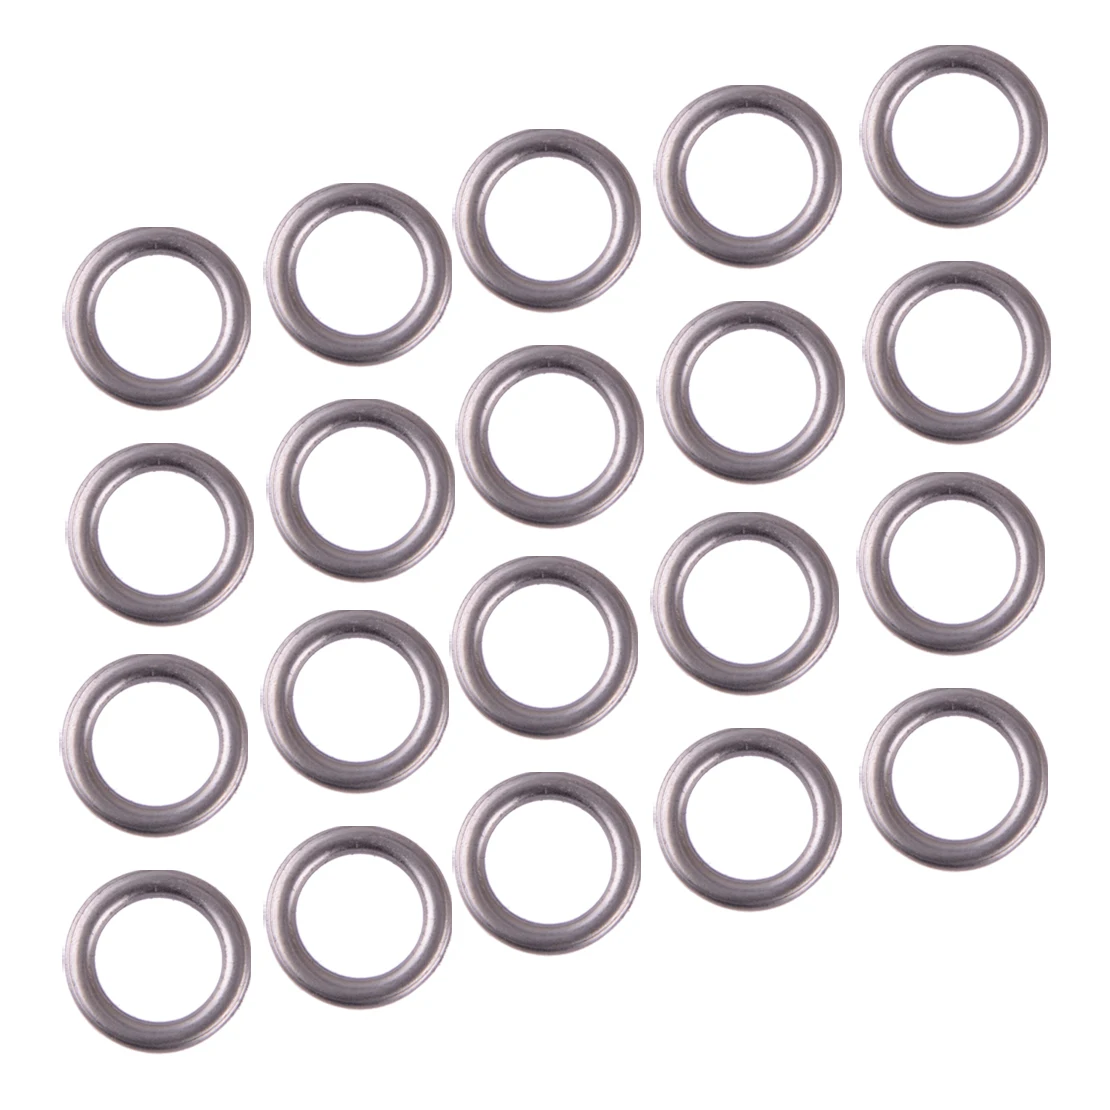 

20Pcs/set Oil Transmission Drain Plug Gaskets Seal Rings Fit for Toyota Tacoma Tundra 4Runner Lexus SC300 IS350 SC400 3517830010